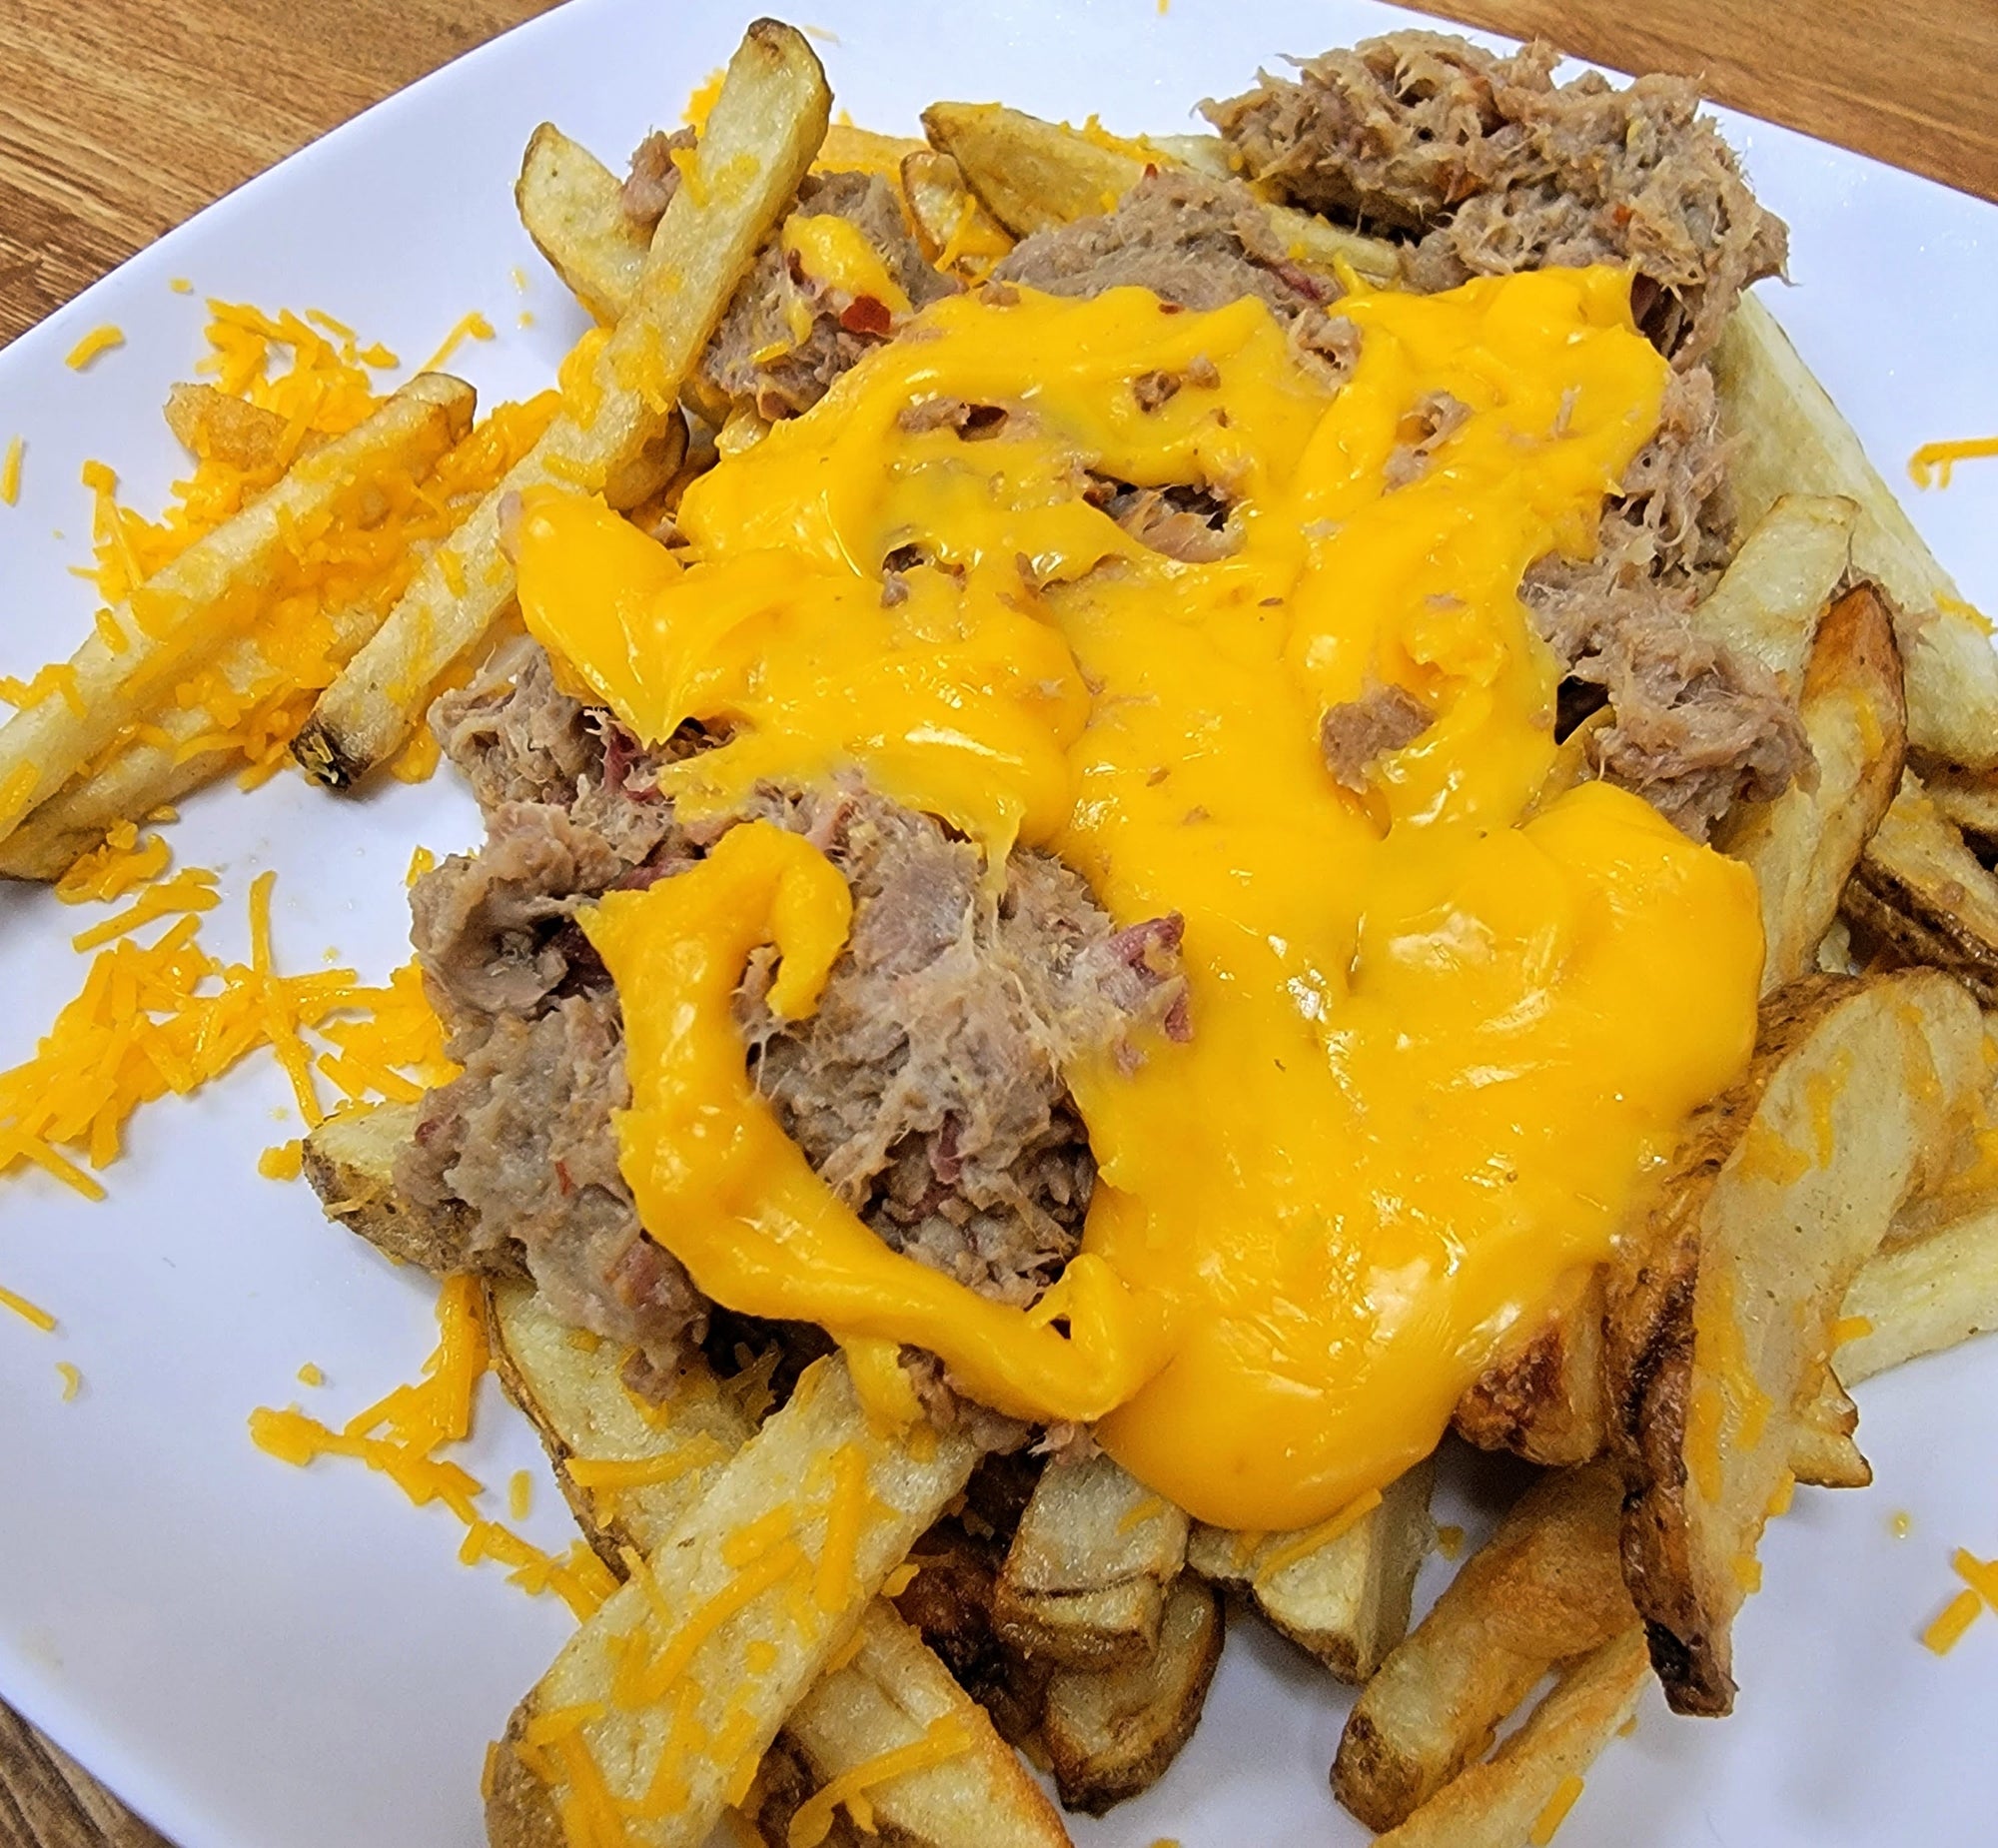 Bright Leaf Loaded Homemade Fries with Pulled Pork and Nacho Cheese